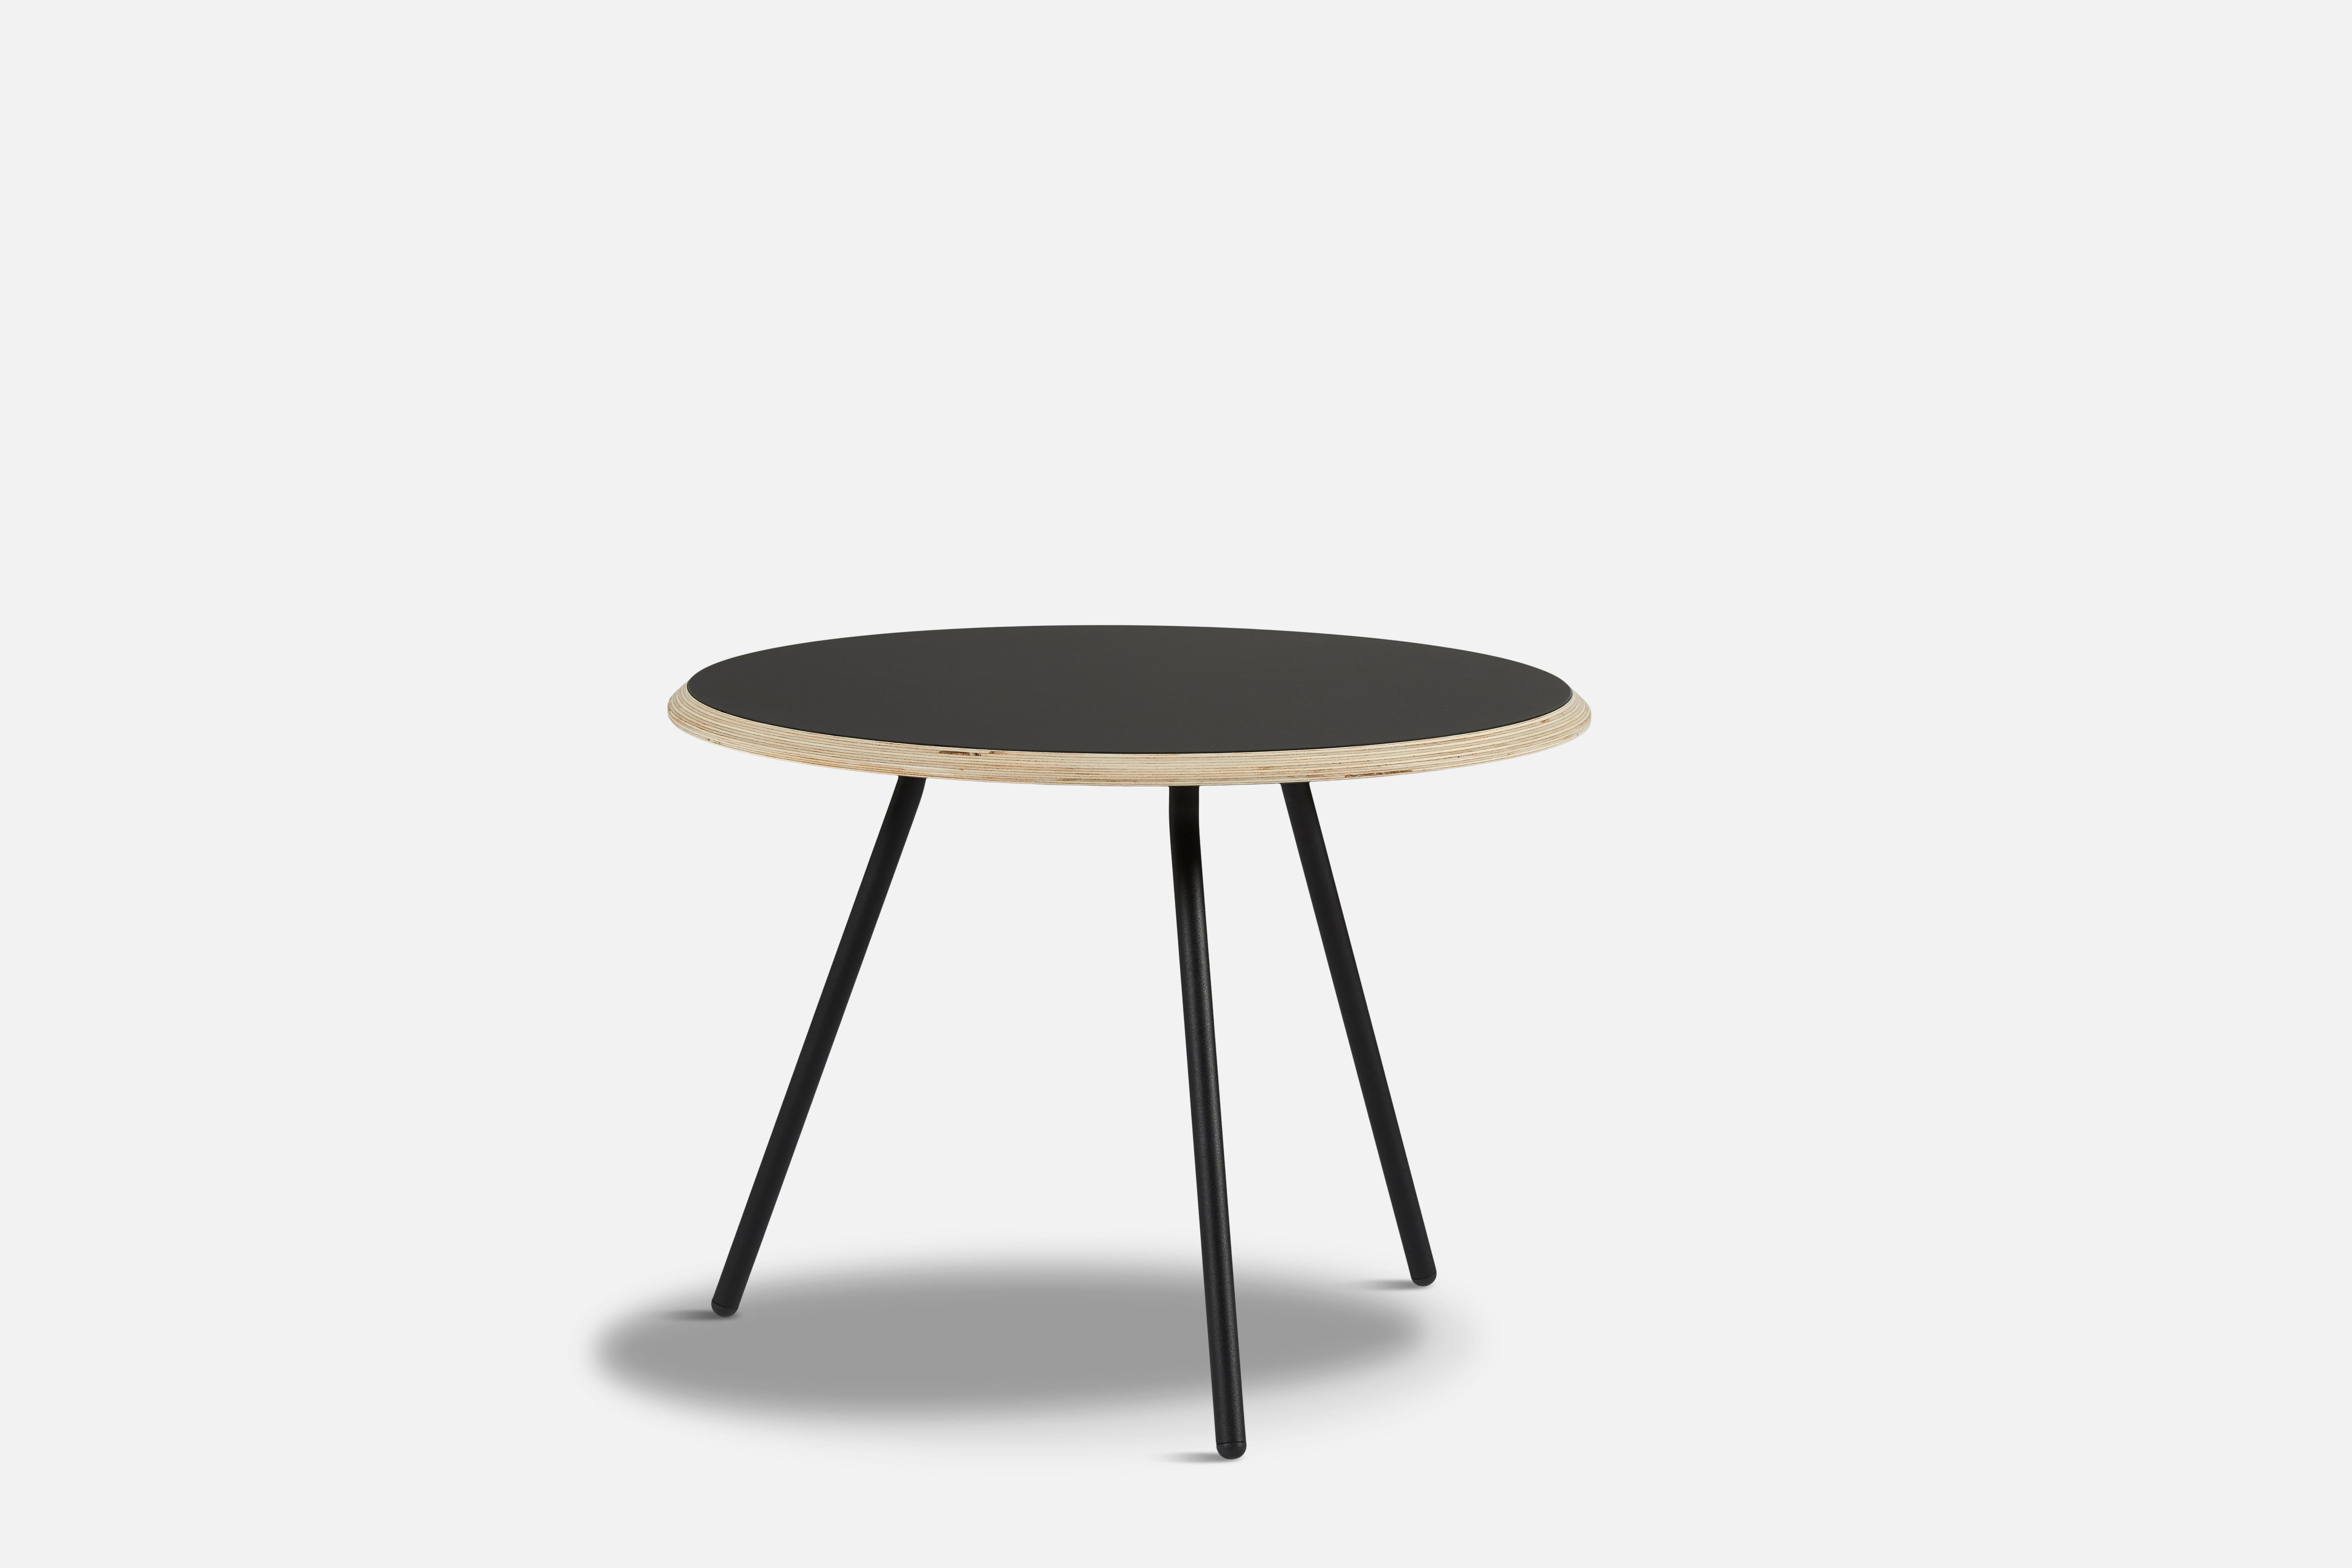 Black Fenix Laminate Soround coffee table 60 by Nur Design
Materials: Metal, Fenix Laminate
Dimensions: D 60 x W 60 x H 49 cm
Also available in different sizes.

The founders, Mia and Torben Koed, decided to put their 30 years of experience